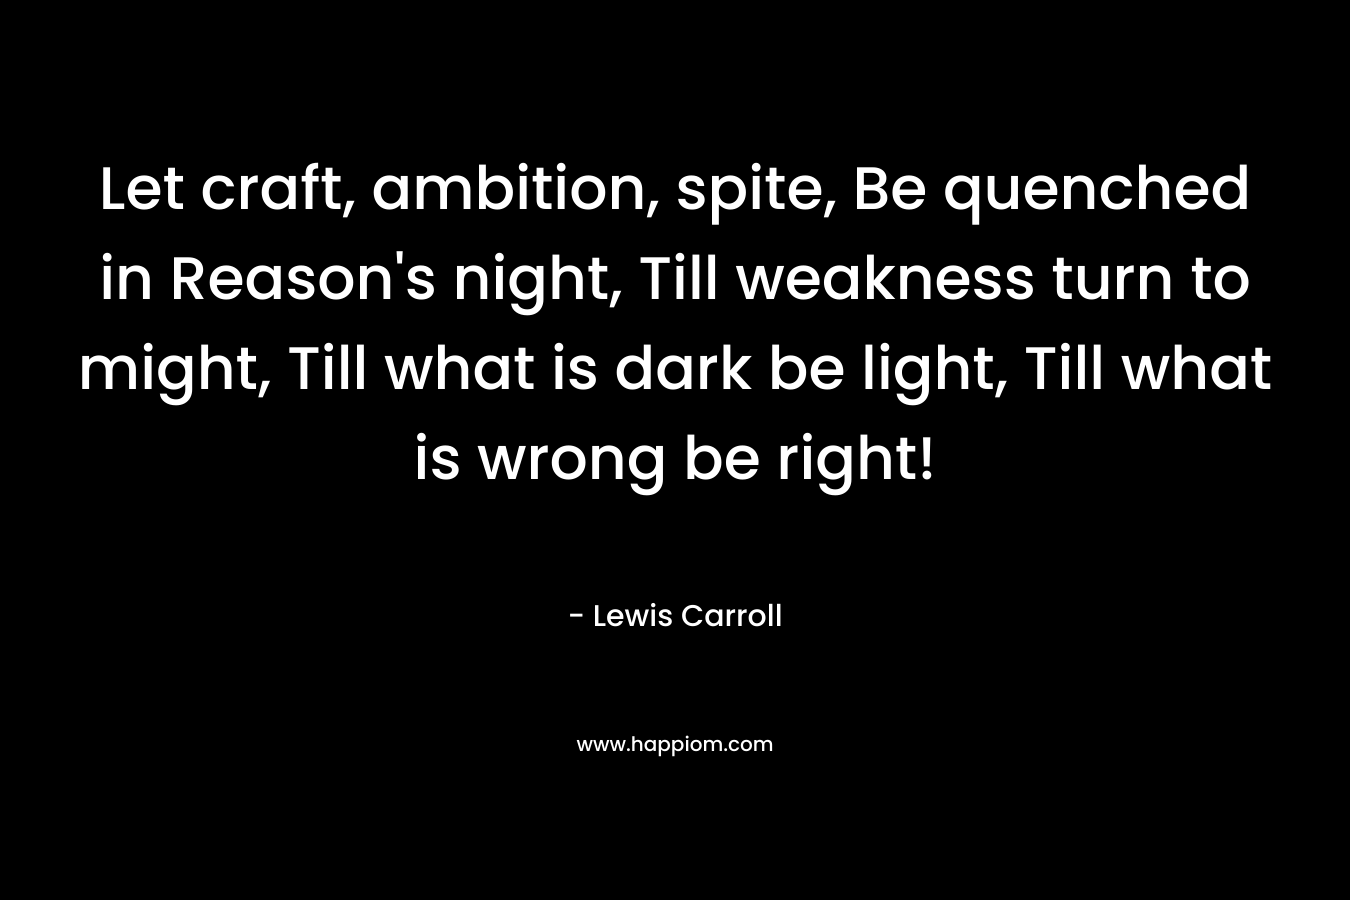 Let craft, ambition, spite, Be quenched in Reason's night, Till weakness turn to might, Till what is dark be light, Till what is wrong be right!